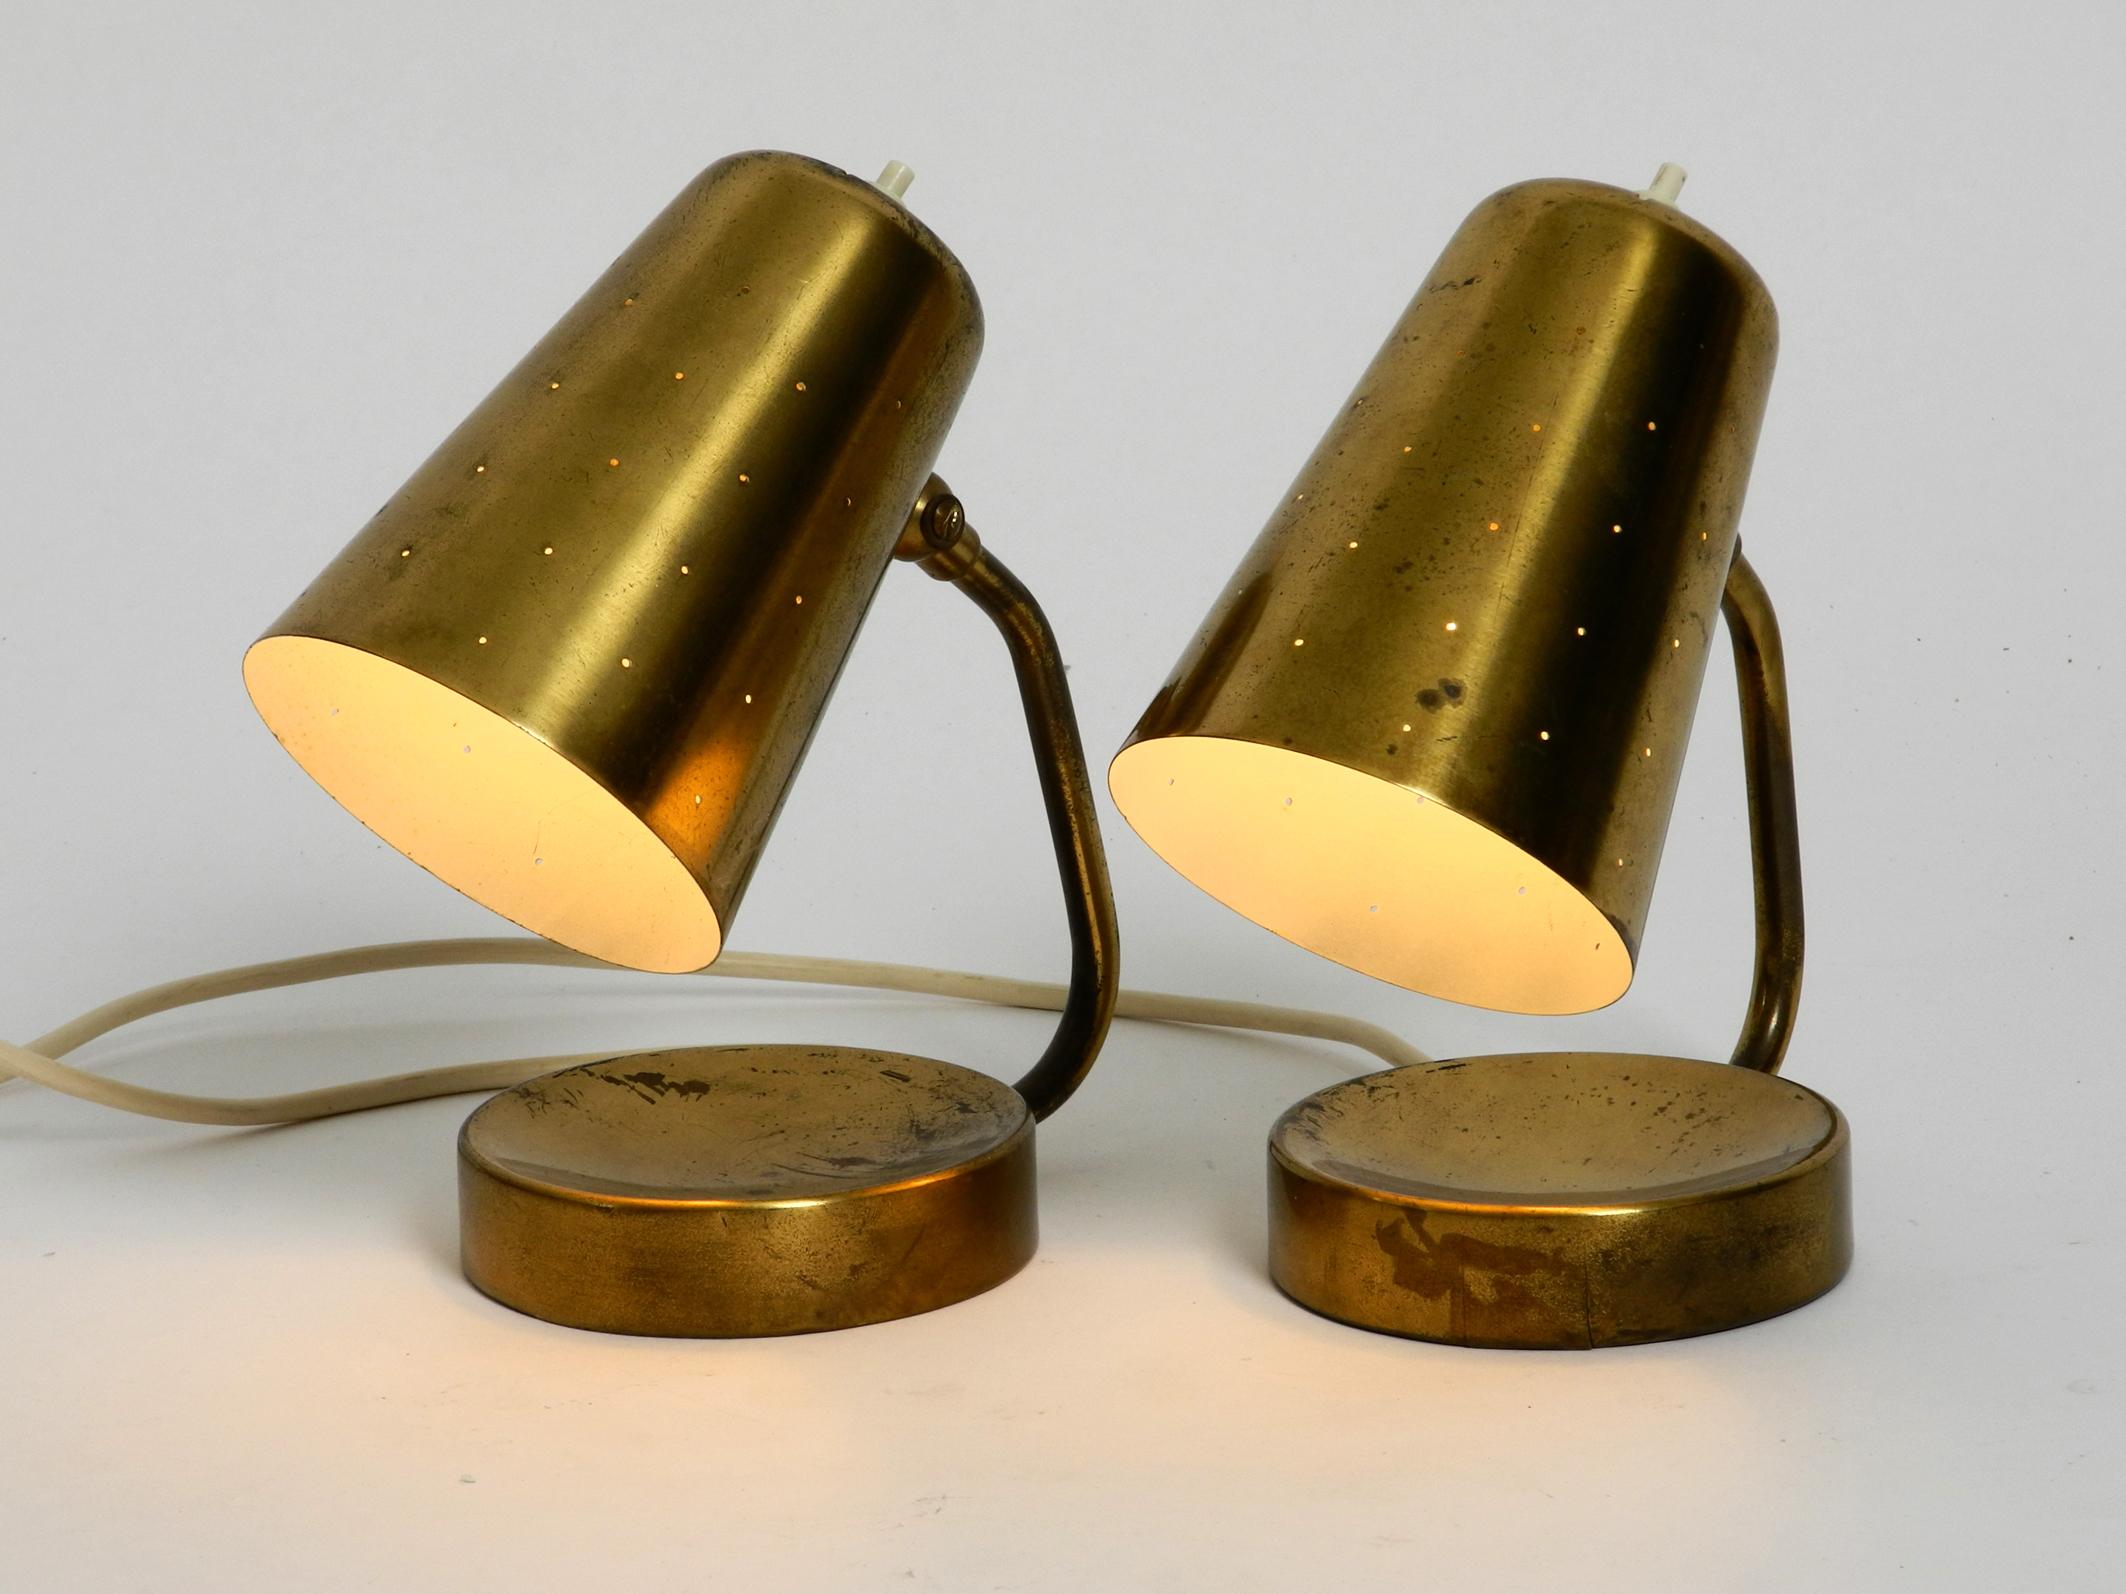 Pair of beautiful large midcentury brass table lamps.
The shades are steplessly adjustable.
Very classy 1950s design.
The shades have small holes, so it looks great when the light is shining through.
Good vintage condition. No damages, no dents